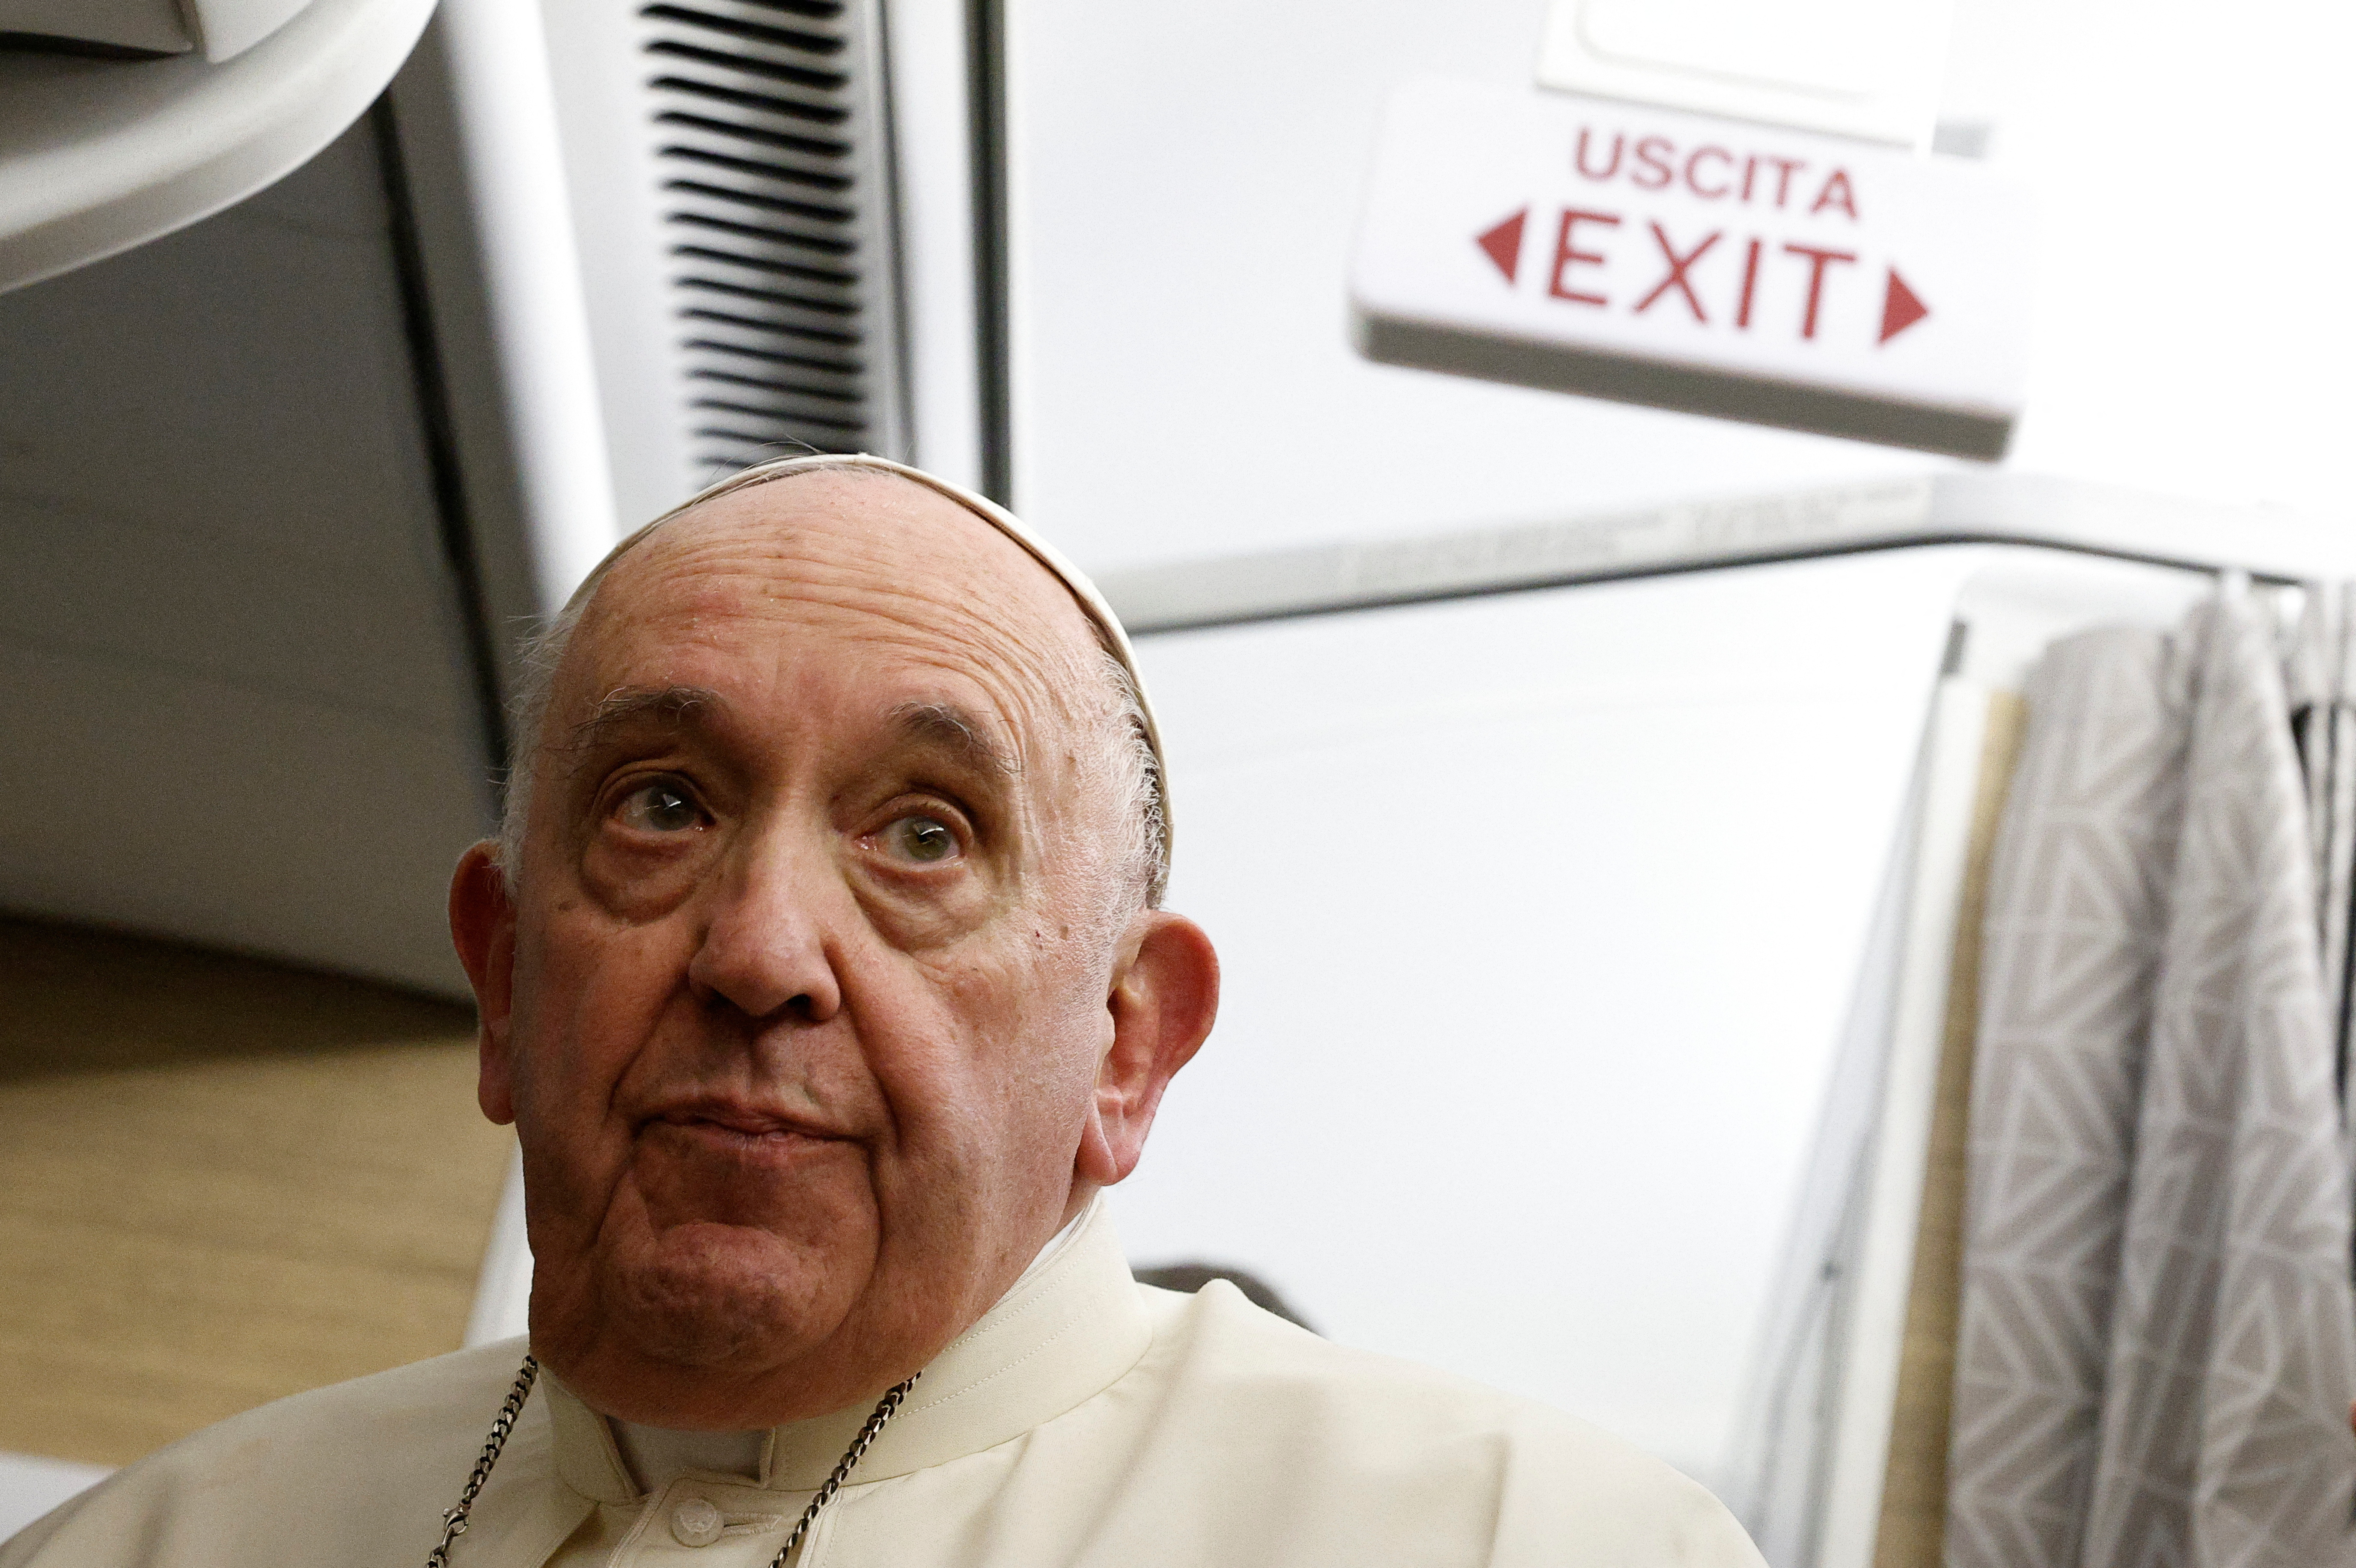 Pope Francis holds a news conference aboard the papal plane on his flight back after visiting Canada